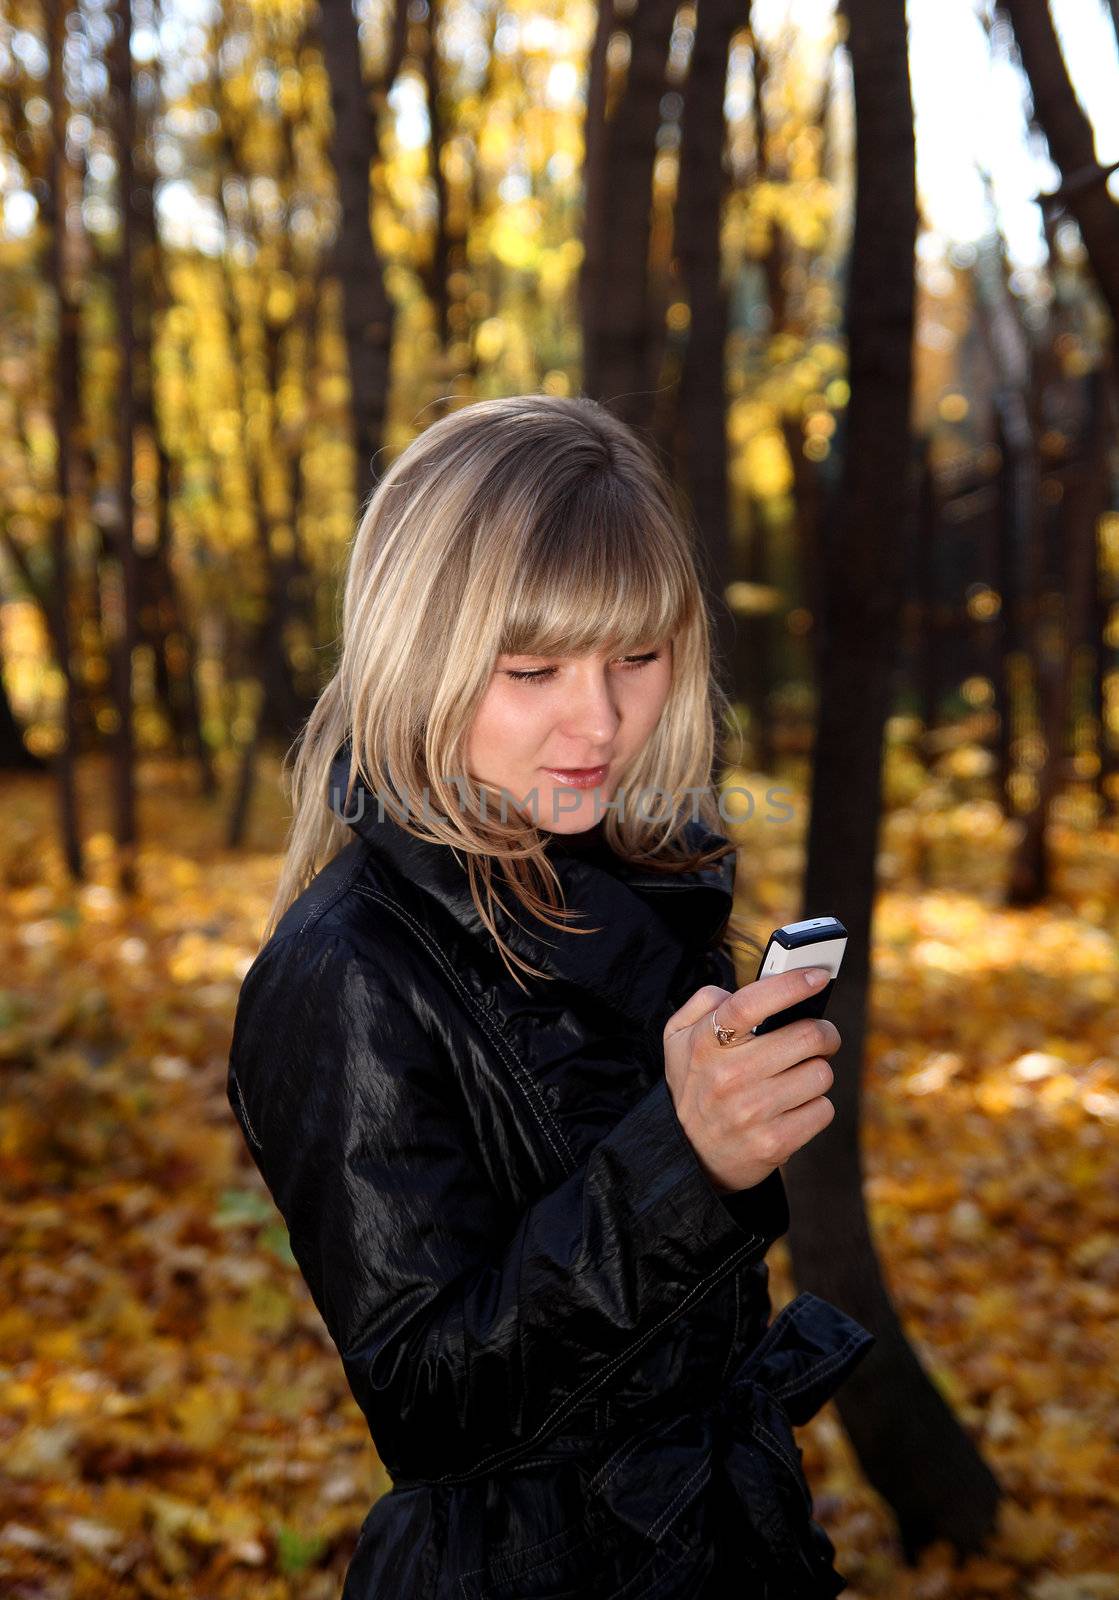 beauty girl messaging with phone in autumn park